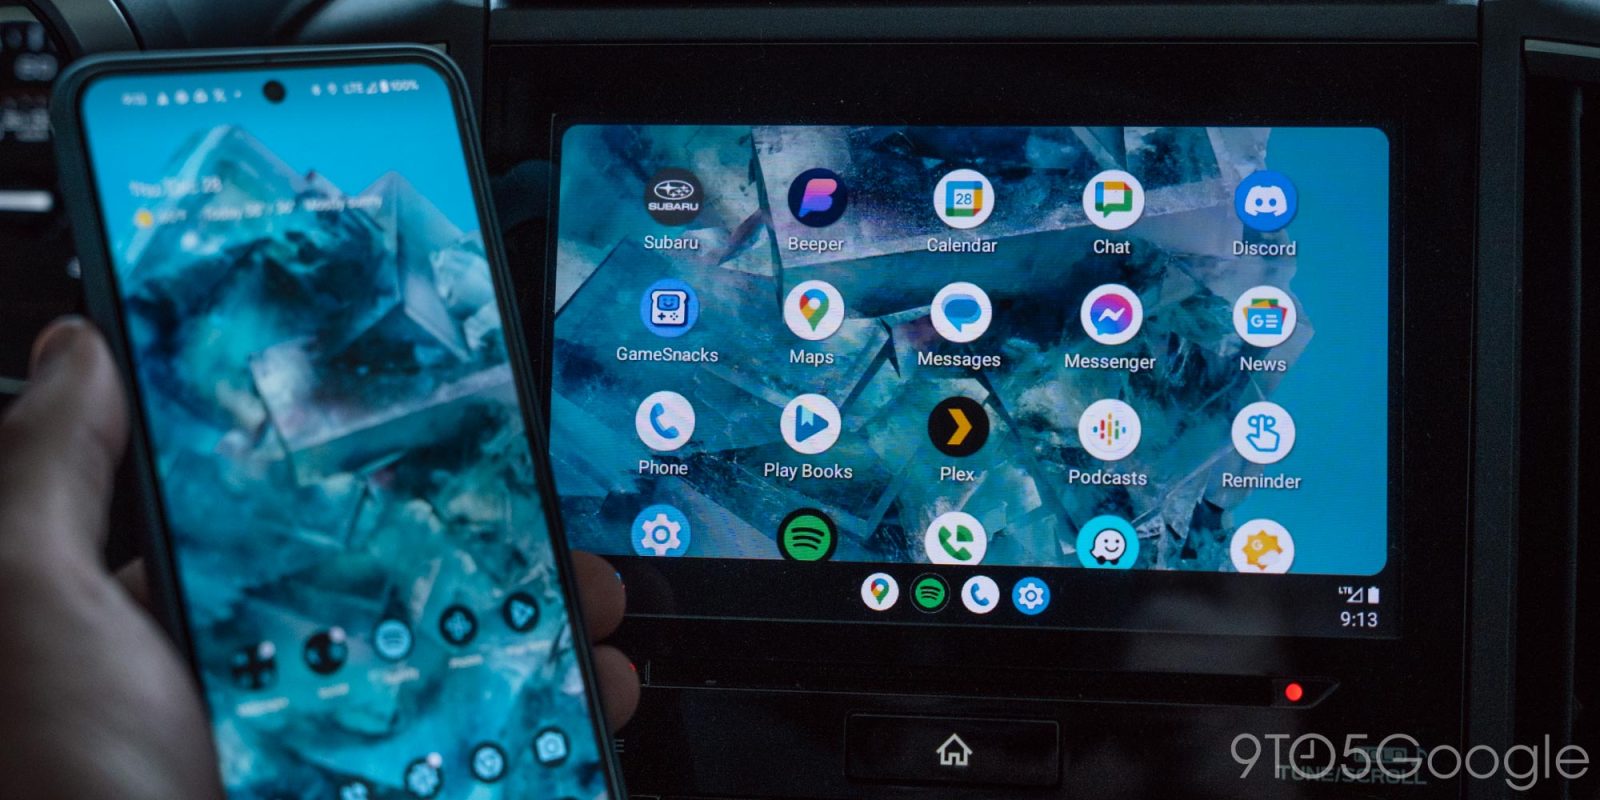 Android Auto now shows your phone wallpaper [Gallery] - 9to5Google